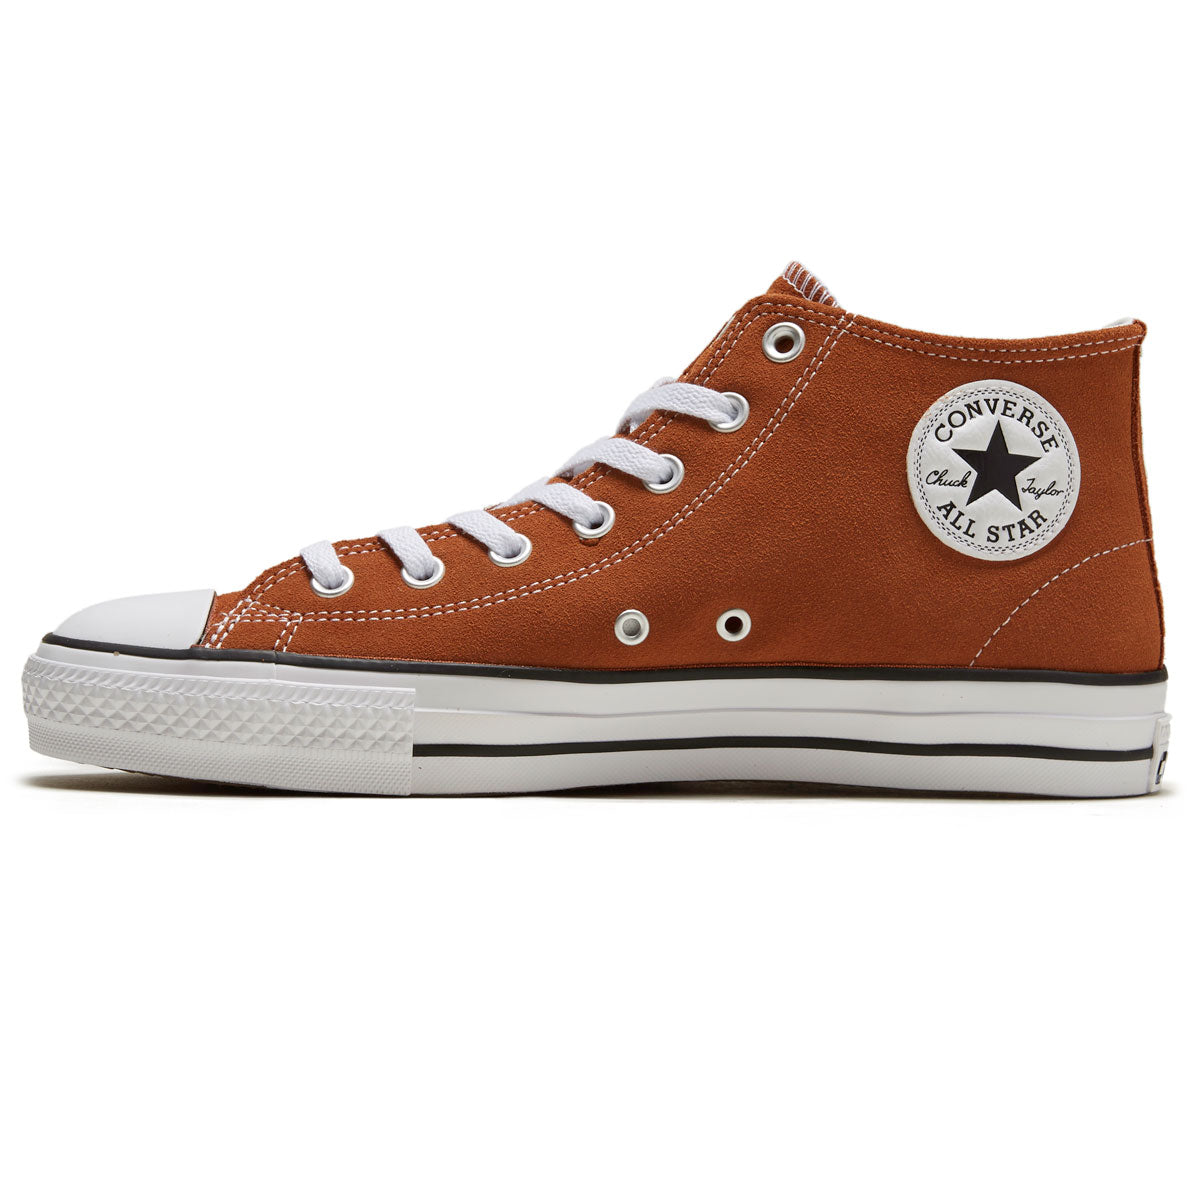 Converse Chuck Taylor All Star Pro Mid Shoes - Tawny Owl/White/Black – CCS